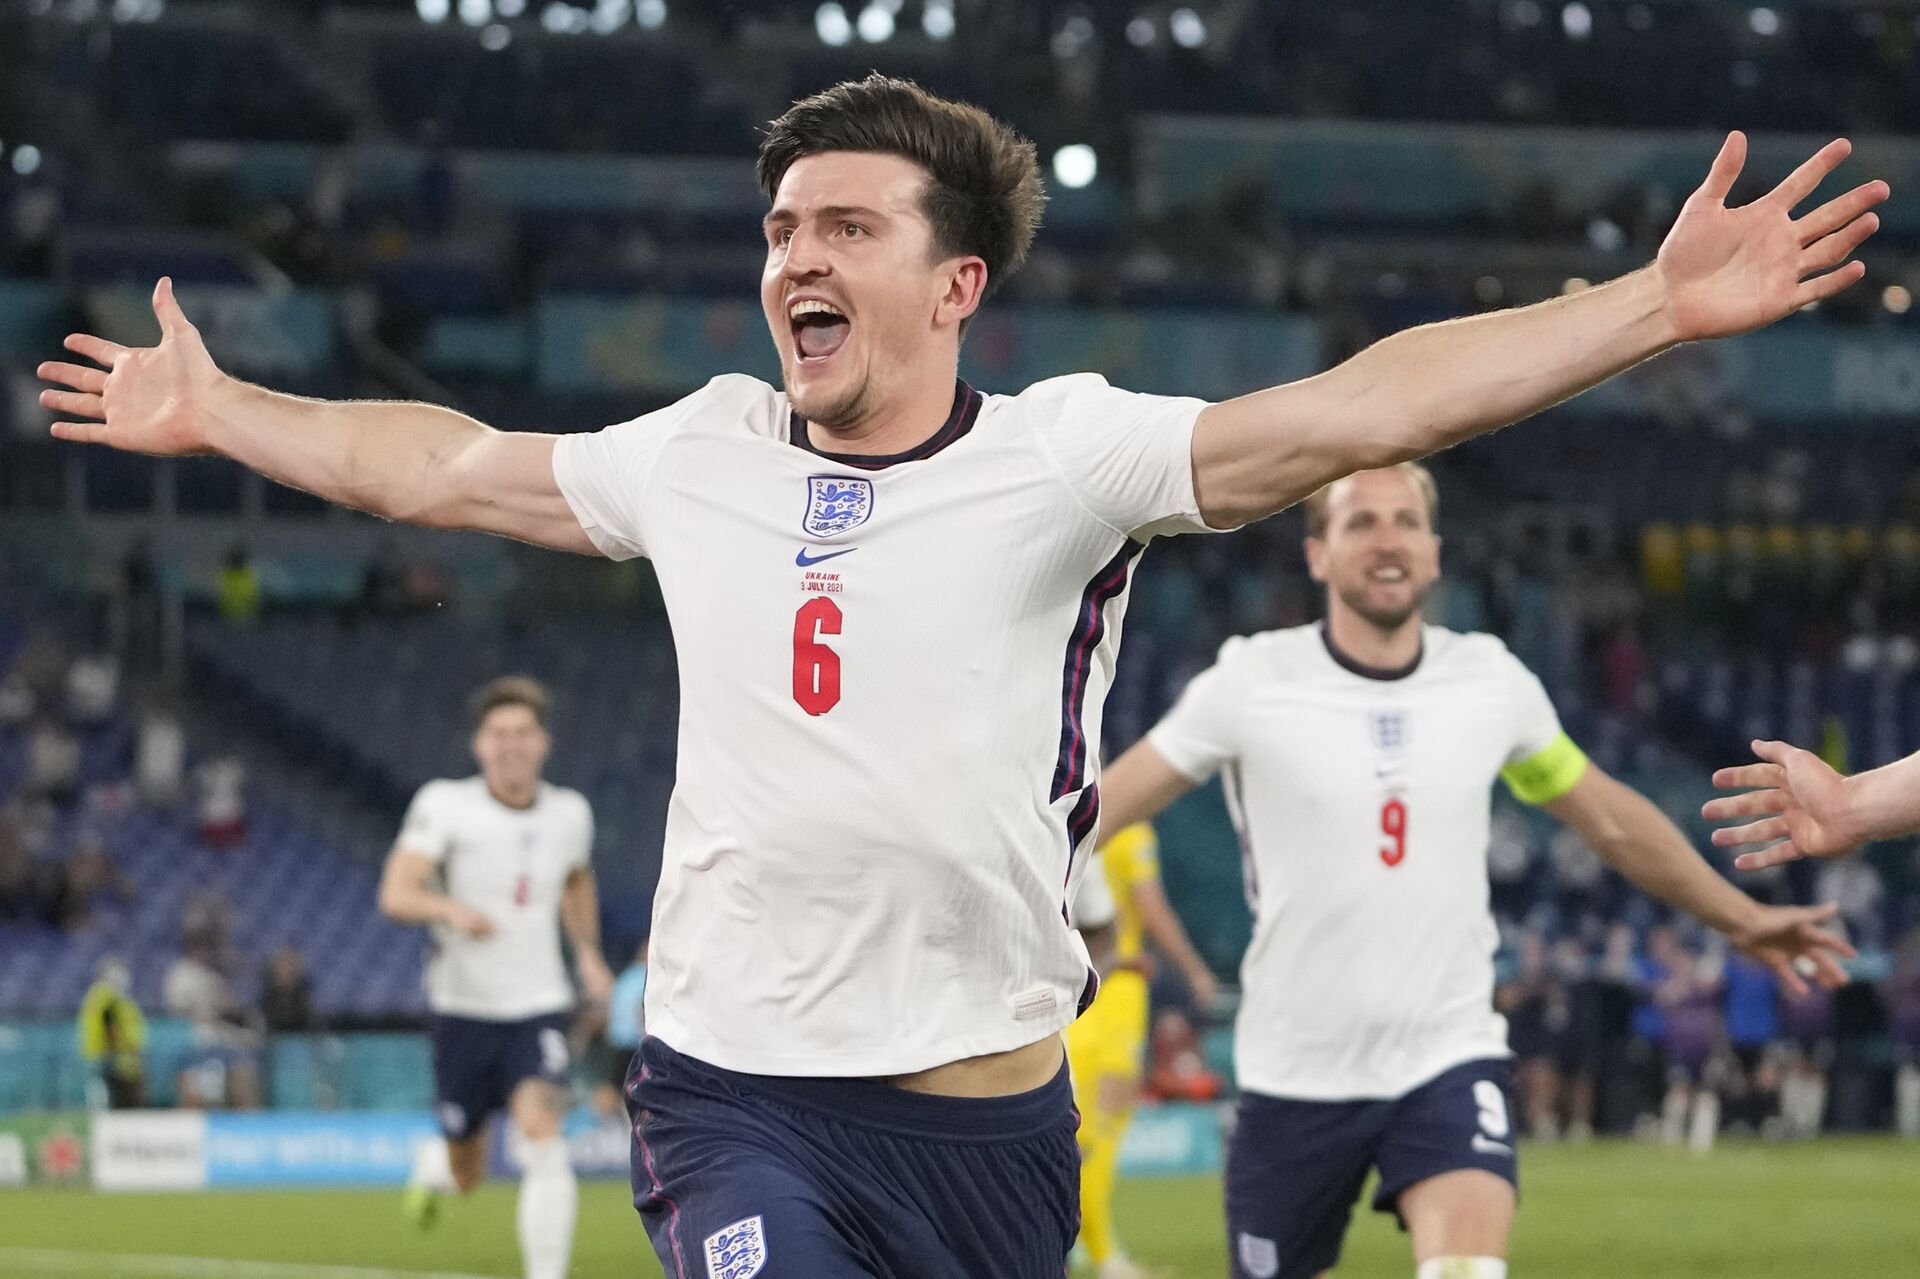 England's Harry Maguire celebrates after scoring his side's second goal during the Euro 2020 soccer championship quarterfinal match between Ukraine and England at the Olympic stadium in Rome at the Olympic stadium in Rome, Italy, Saturday, July 3, 2021 - Sputnik International, 1920, 07.09.2021